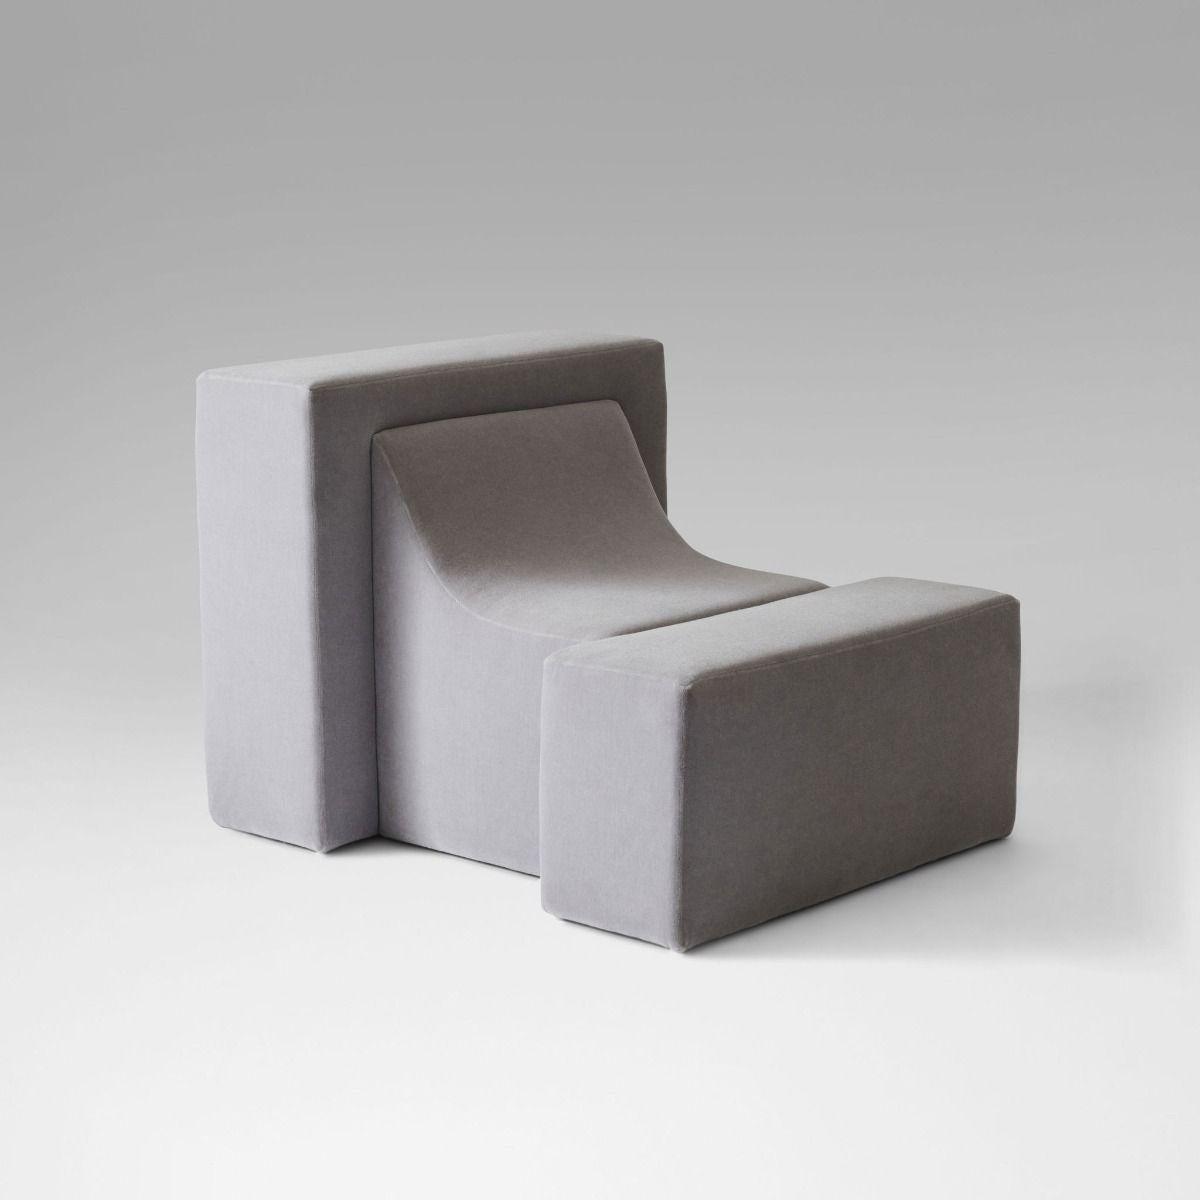 Contemporary Block Chair For Sale